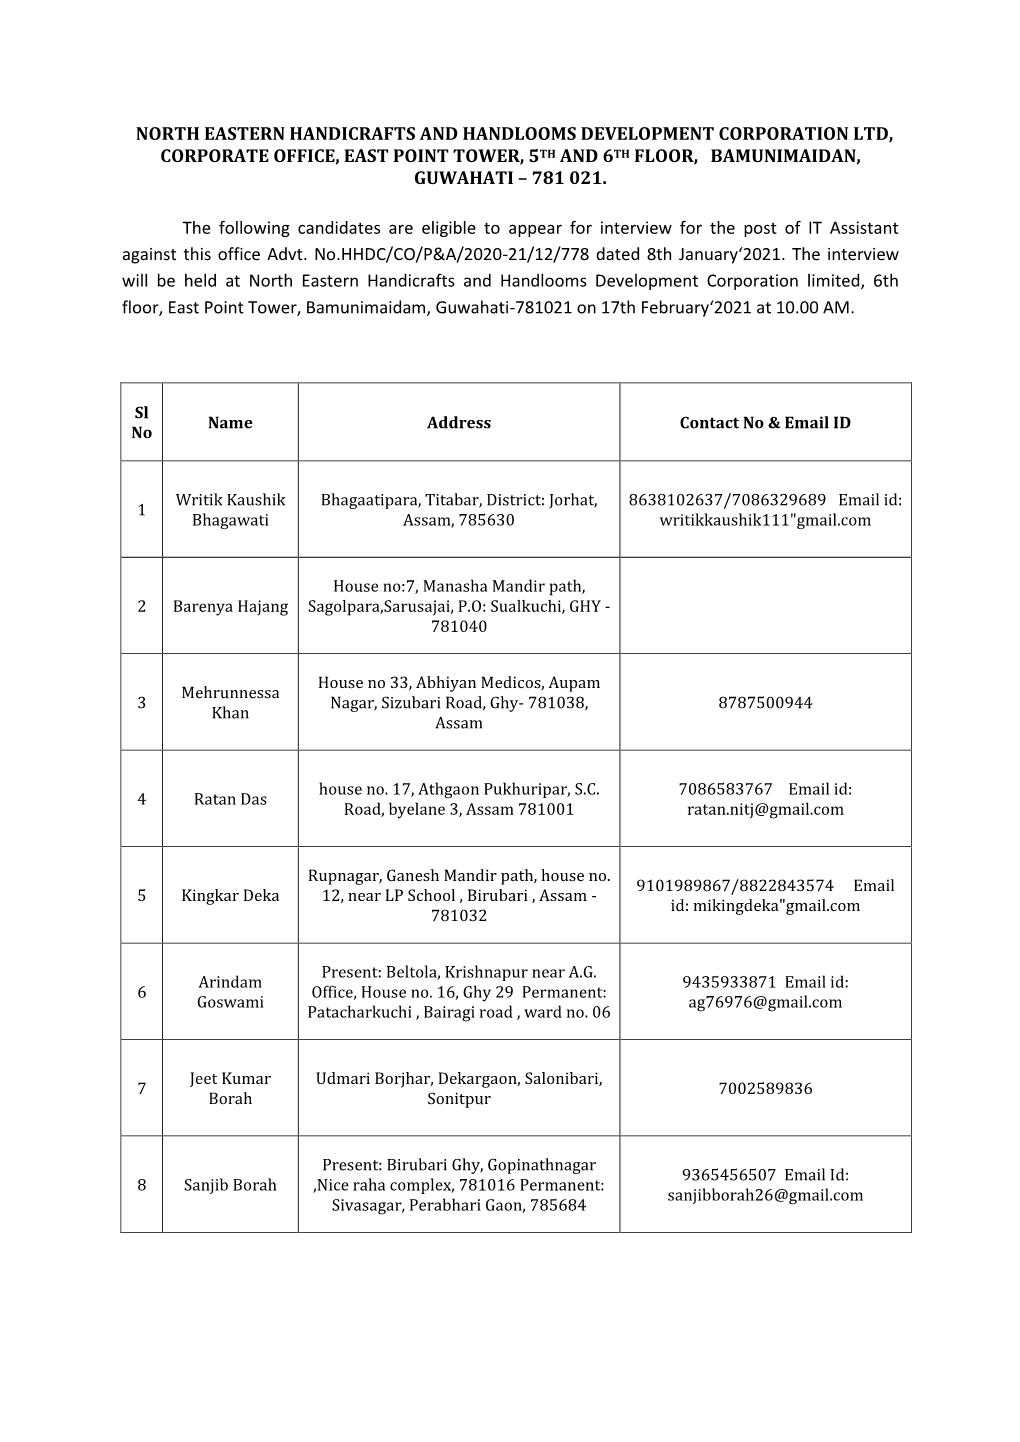 List of Eligible Candidates for Interview for the Post of IT Assistant